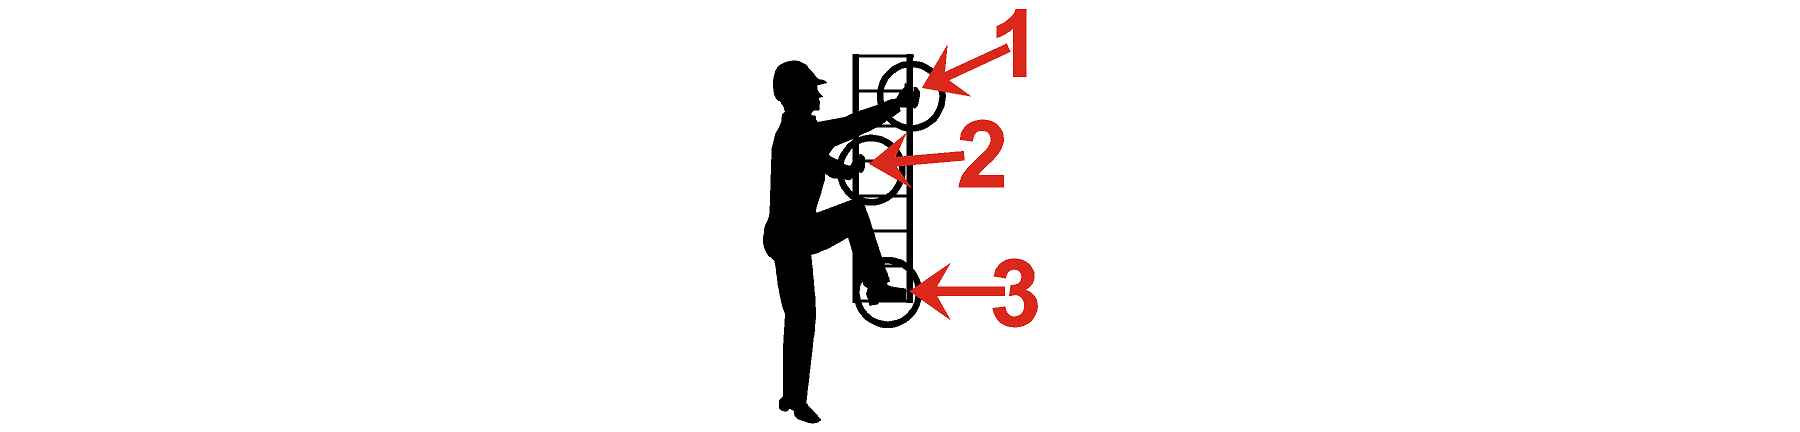 The Three Points of Contact Rule Is to Help Prevent Injury From Falling.